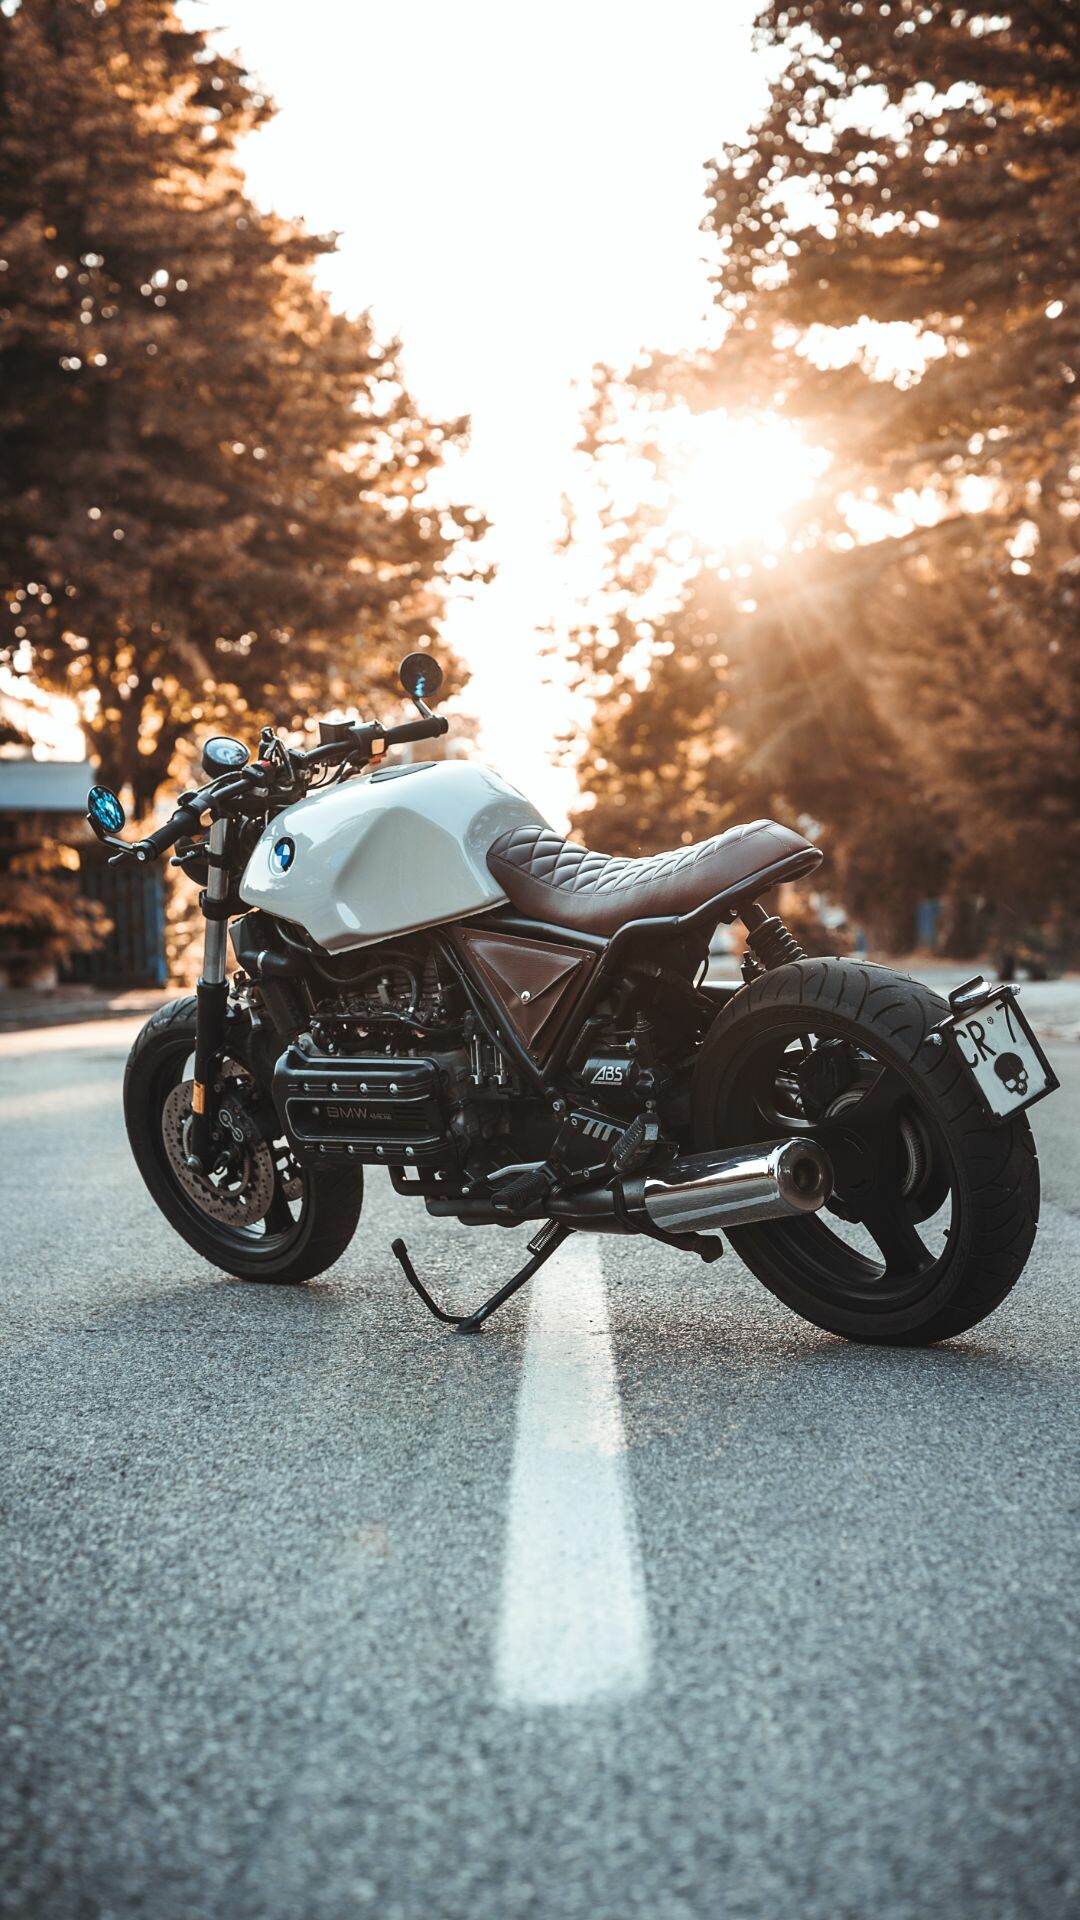 Bike: BMW K100RS cafe racer, Four-cylinder 987 cc motorcycle. 1080x1920 Full HD Background.